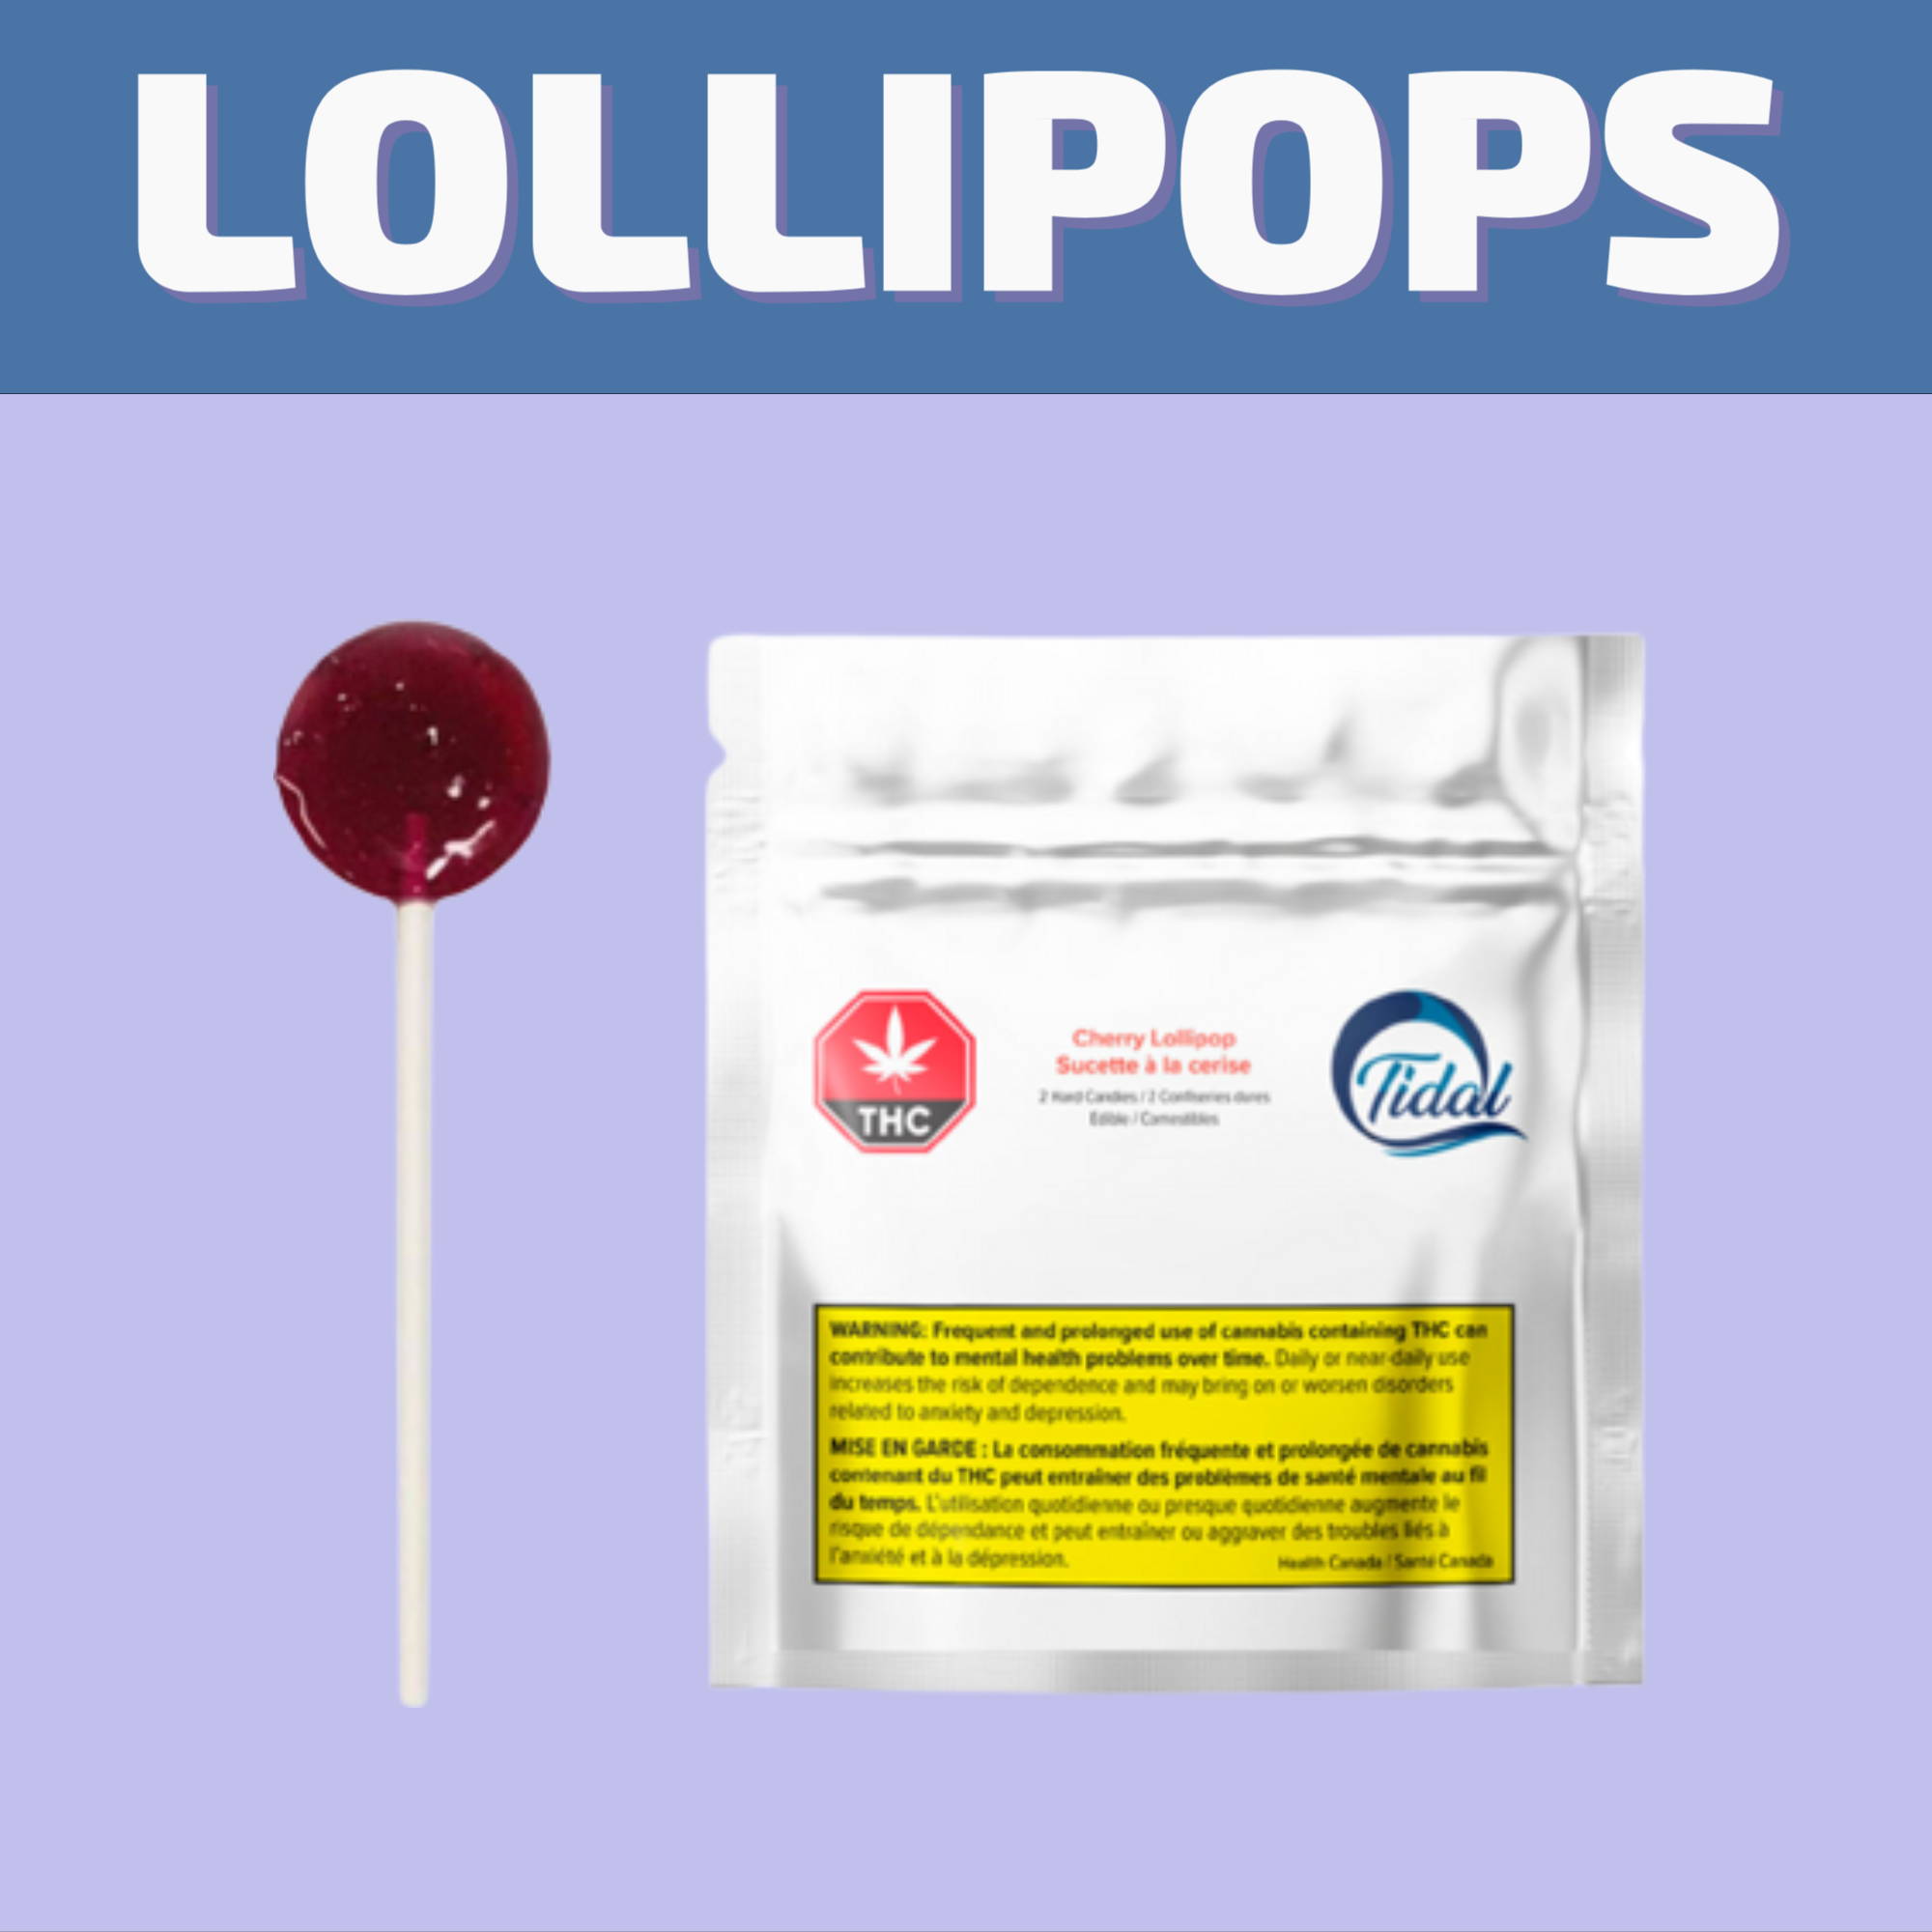 Order Lollipops and other infused hard candies from Winnipeg's best cannabis shop on 580 Academy Road.